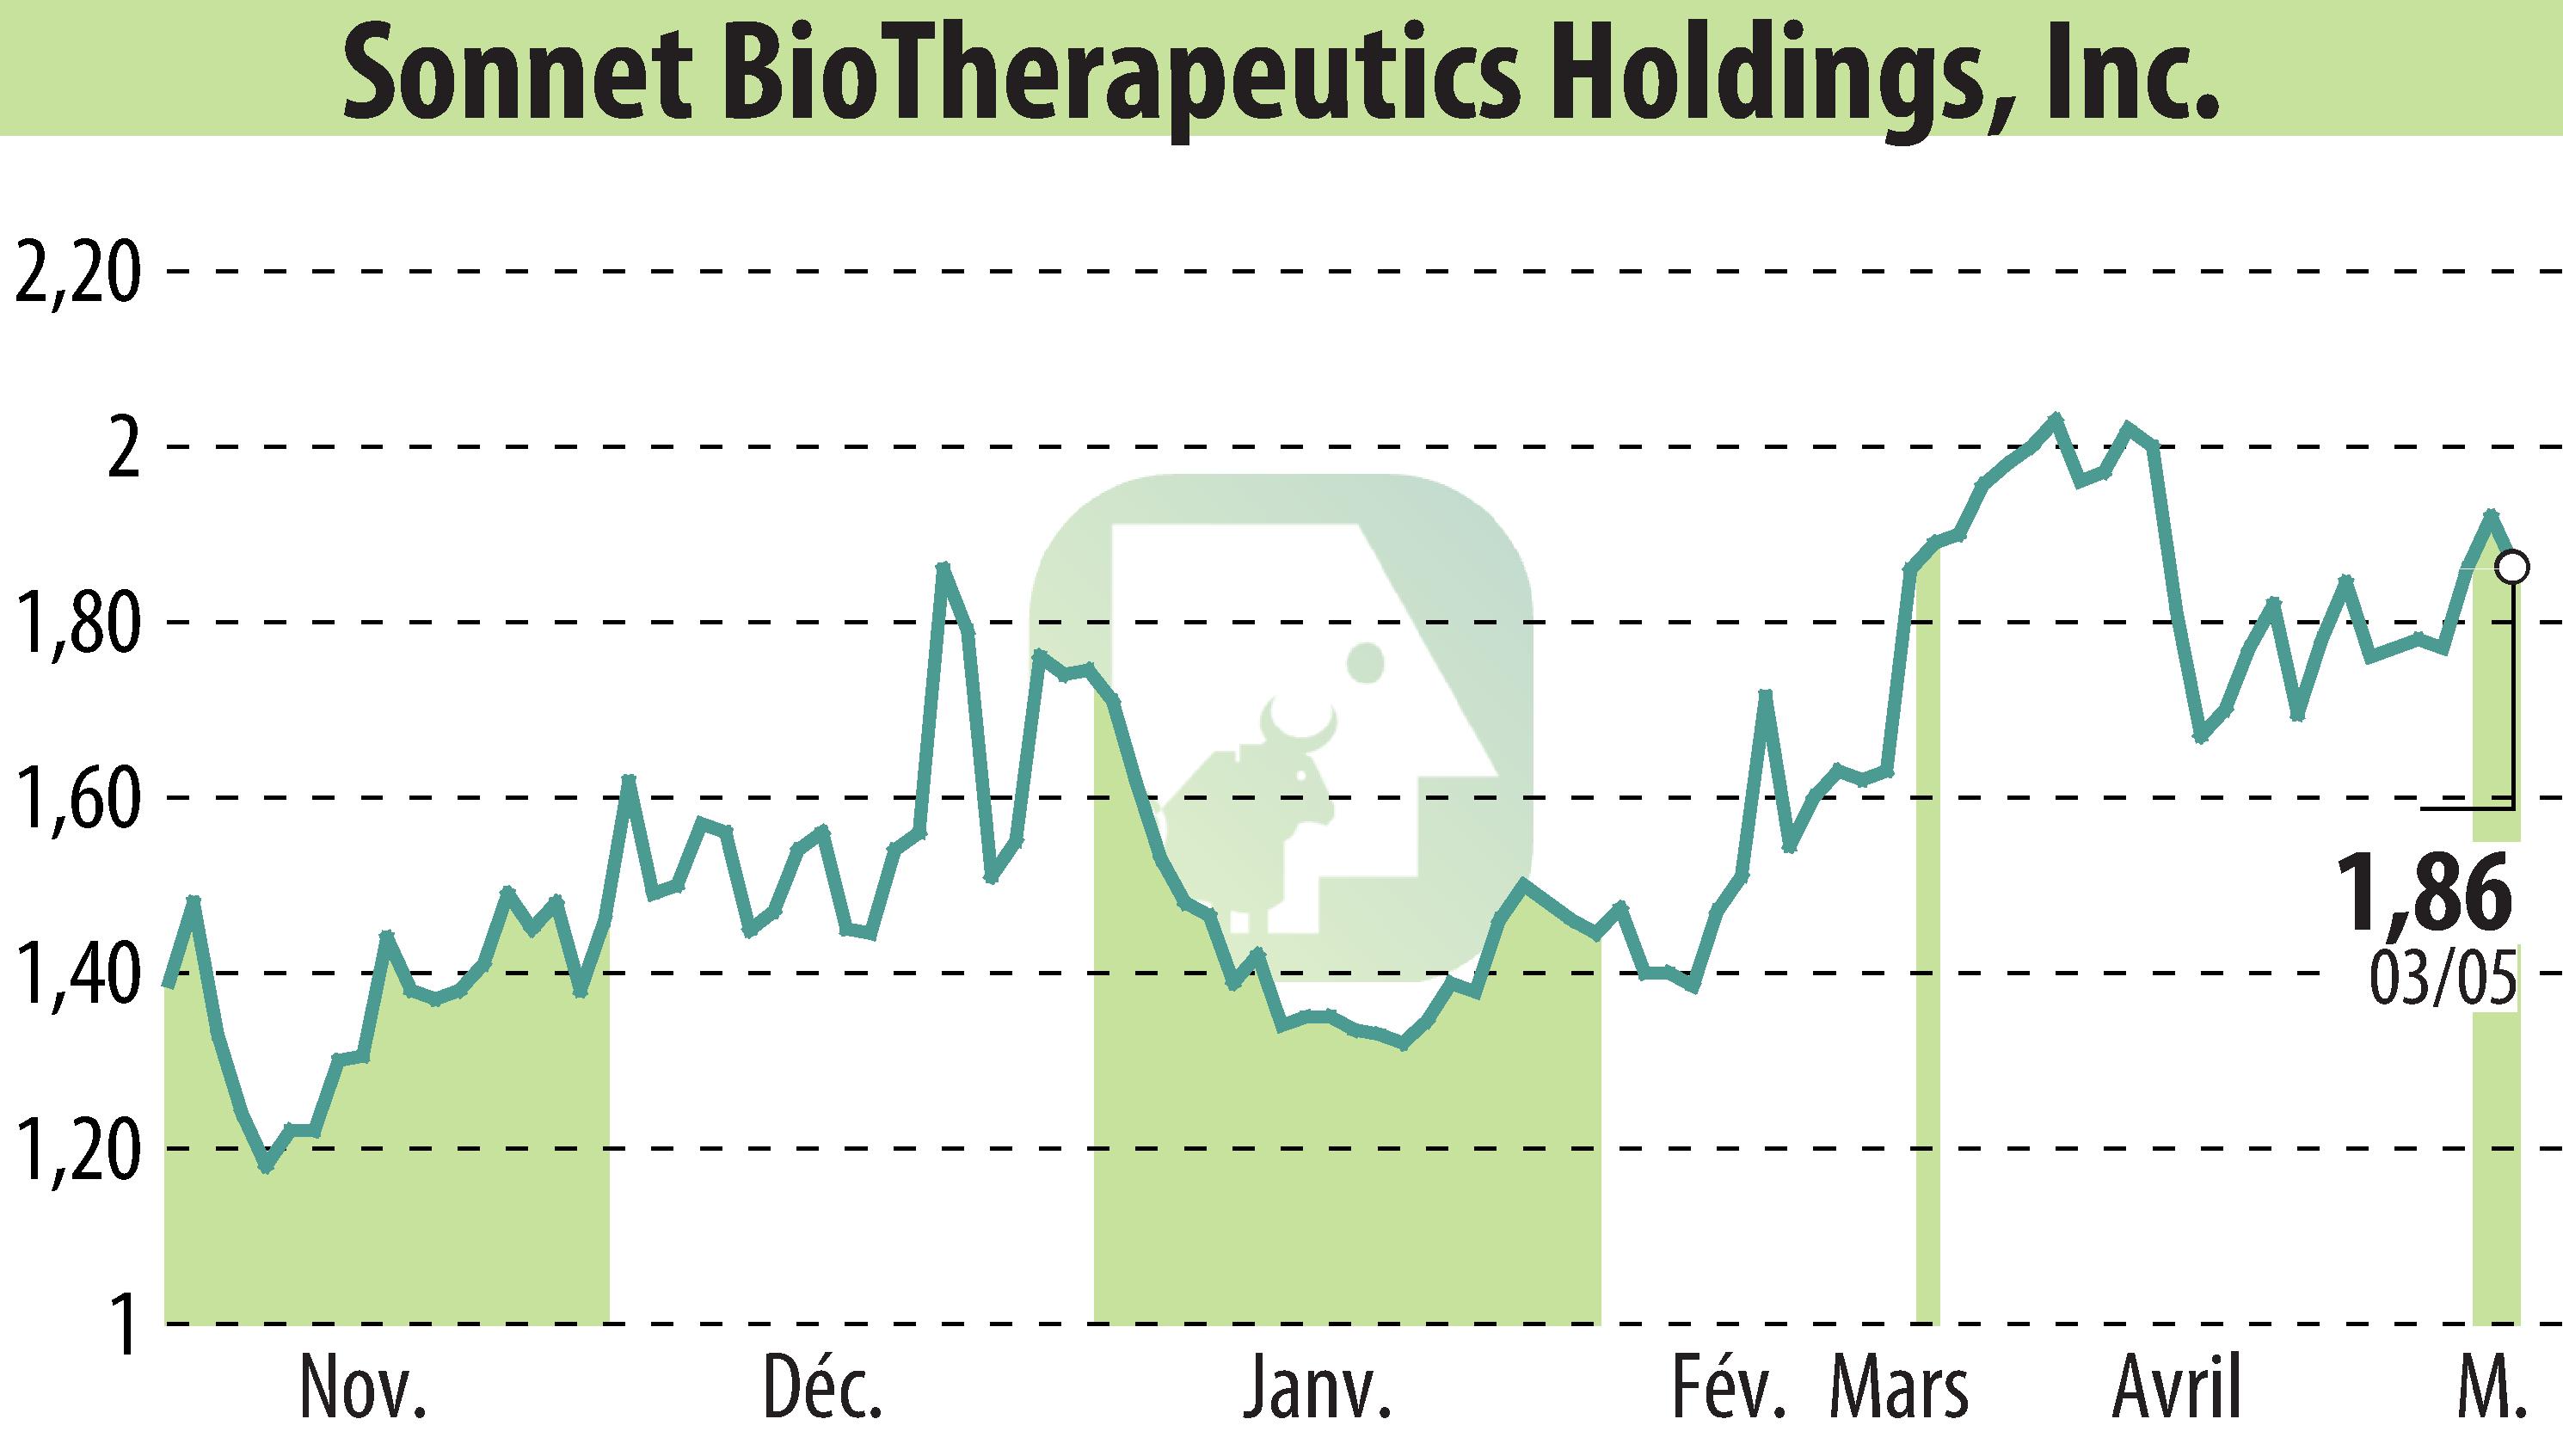 Stock price chart of Sonnet BioTherapeutics, Inc. (EBR:SONN) showing fluctuations.